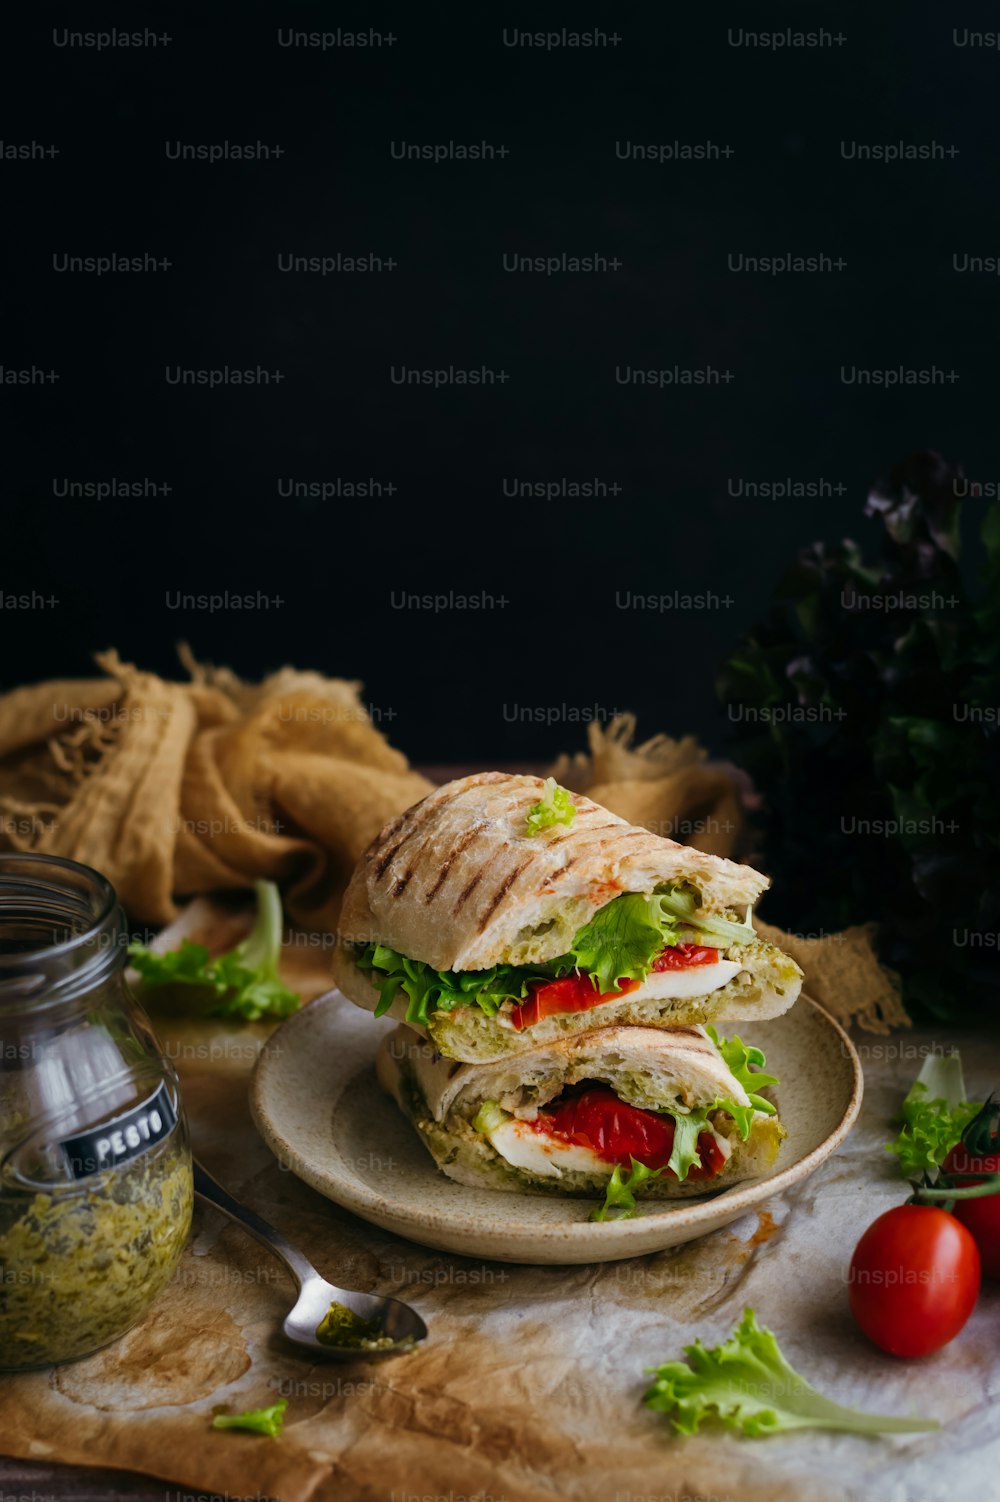 a sandwich with lettuce and tomatoes on a plate